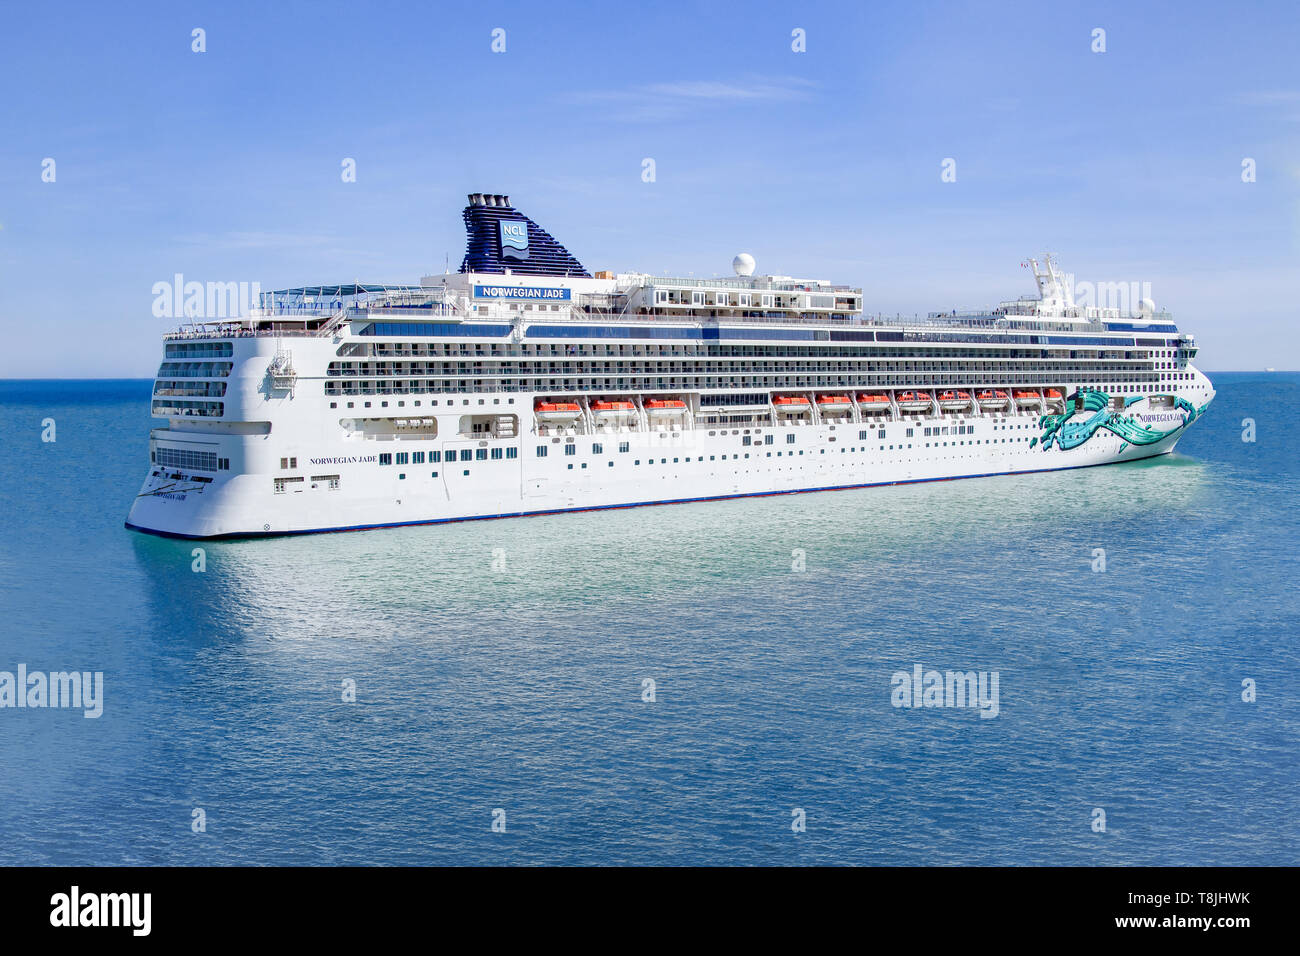 BARCELONA, SPAIN-MAY 9, 2019: Norwegian Jade cruise ship in the open sea near the City, aerial view Stock Photo